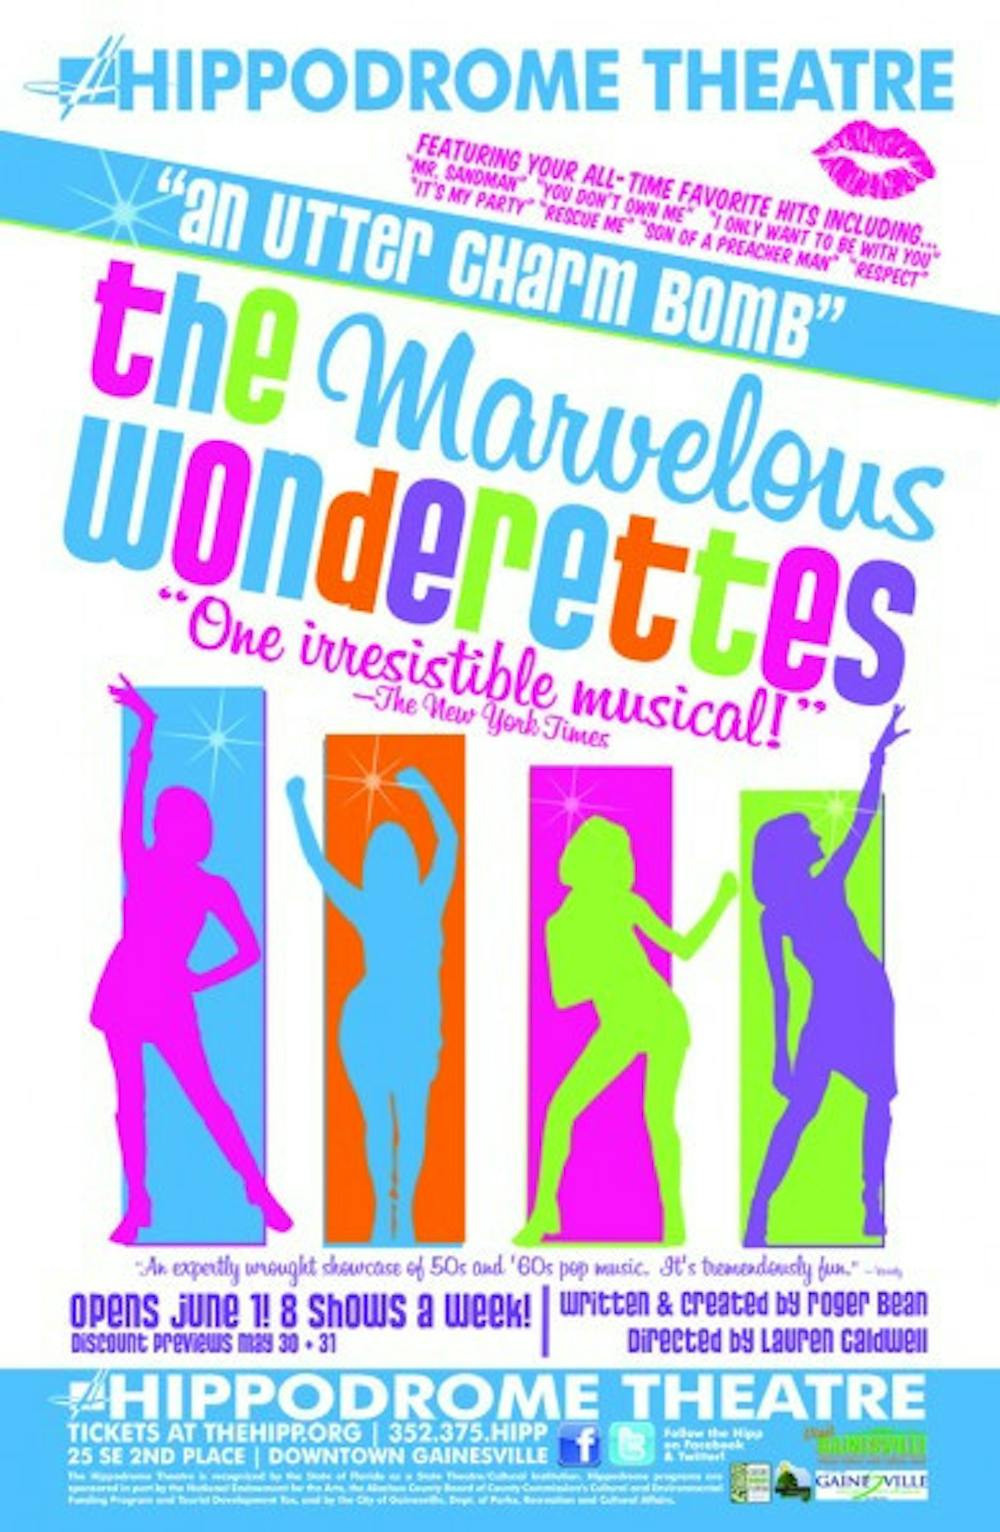 <p>The Hippodrome Theatre will be putting on “The Marvelous Wonderettes” as its annual summer musical. It will be on the stage eight times a week starting June 1.</p>